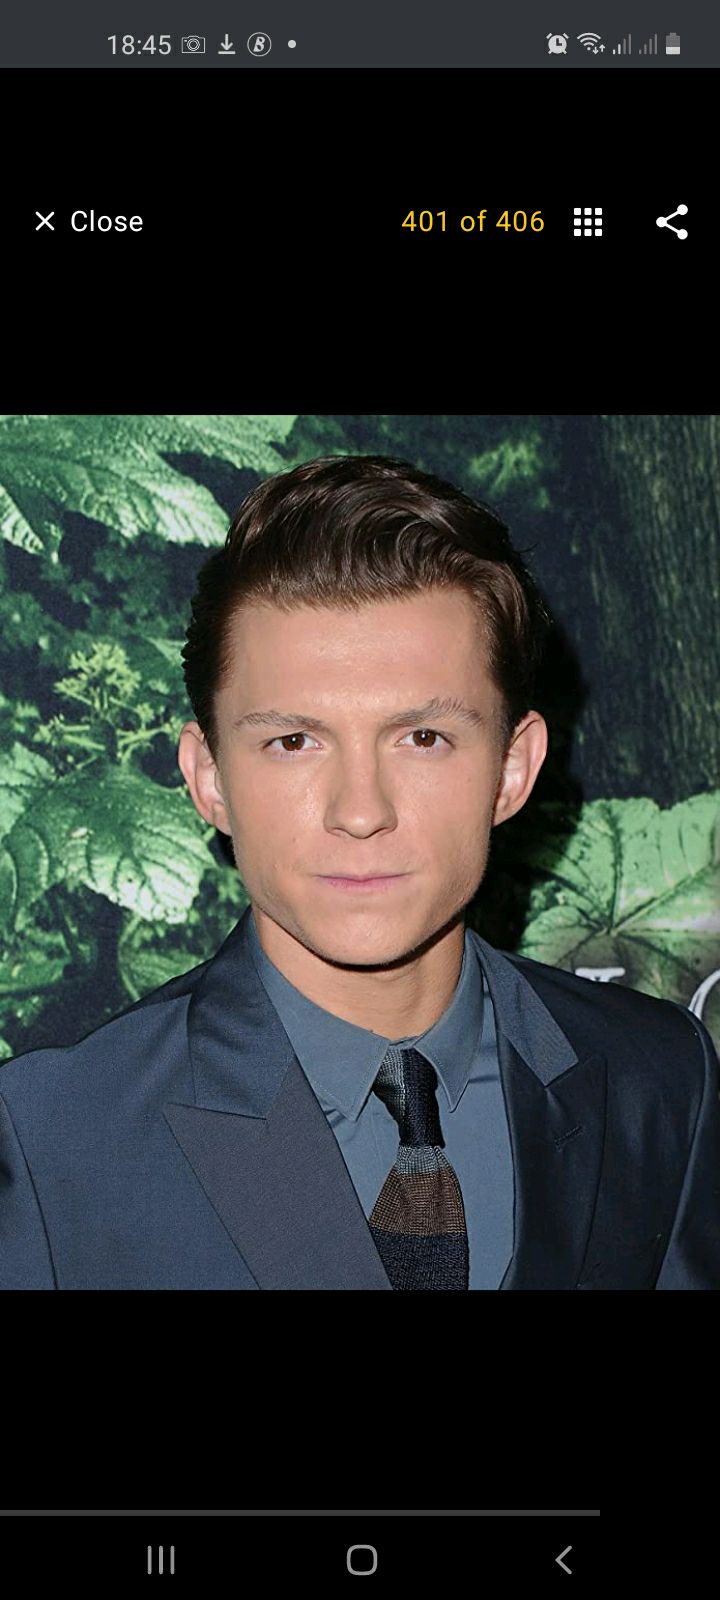 Tom Holland was certain he’d get fired by Marvel after ‘Civil War’